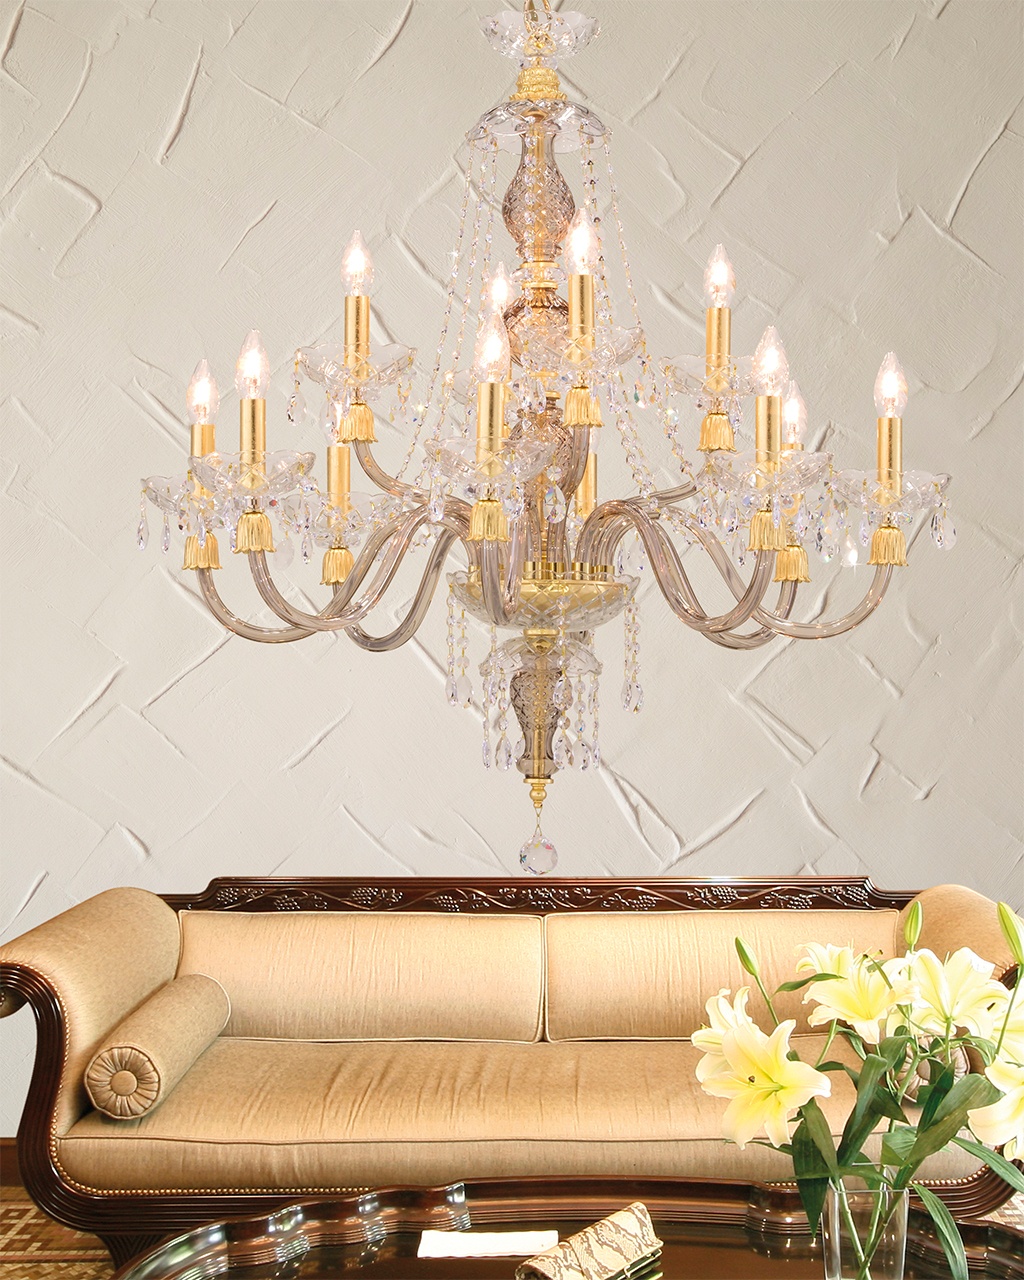 New creation "Mirsini" Crystal Chandelier Collection